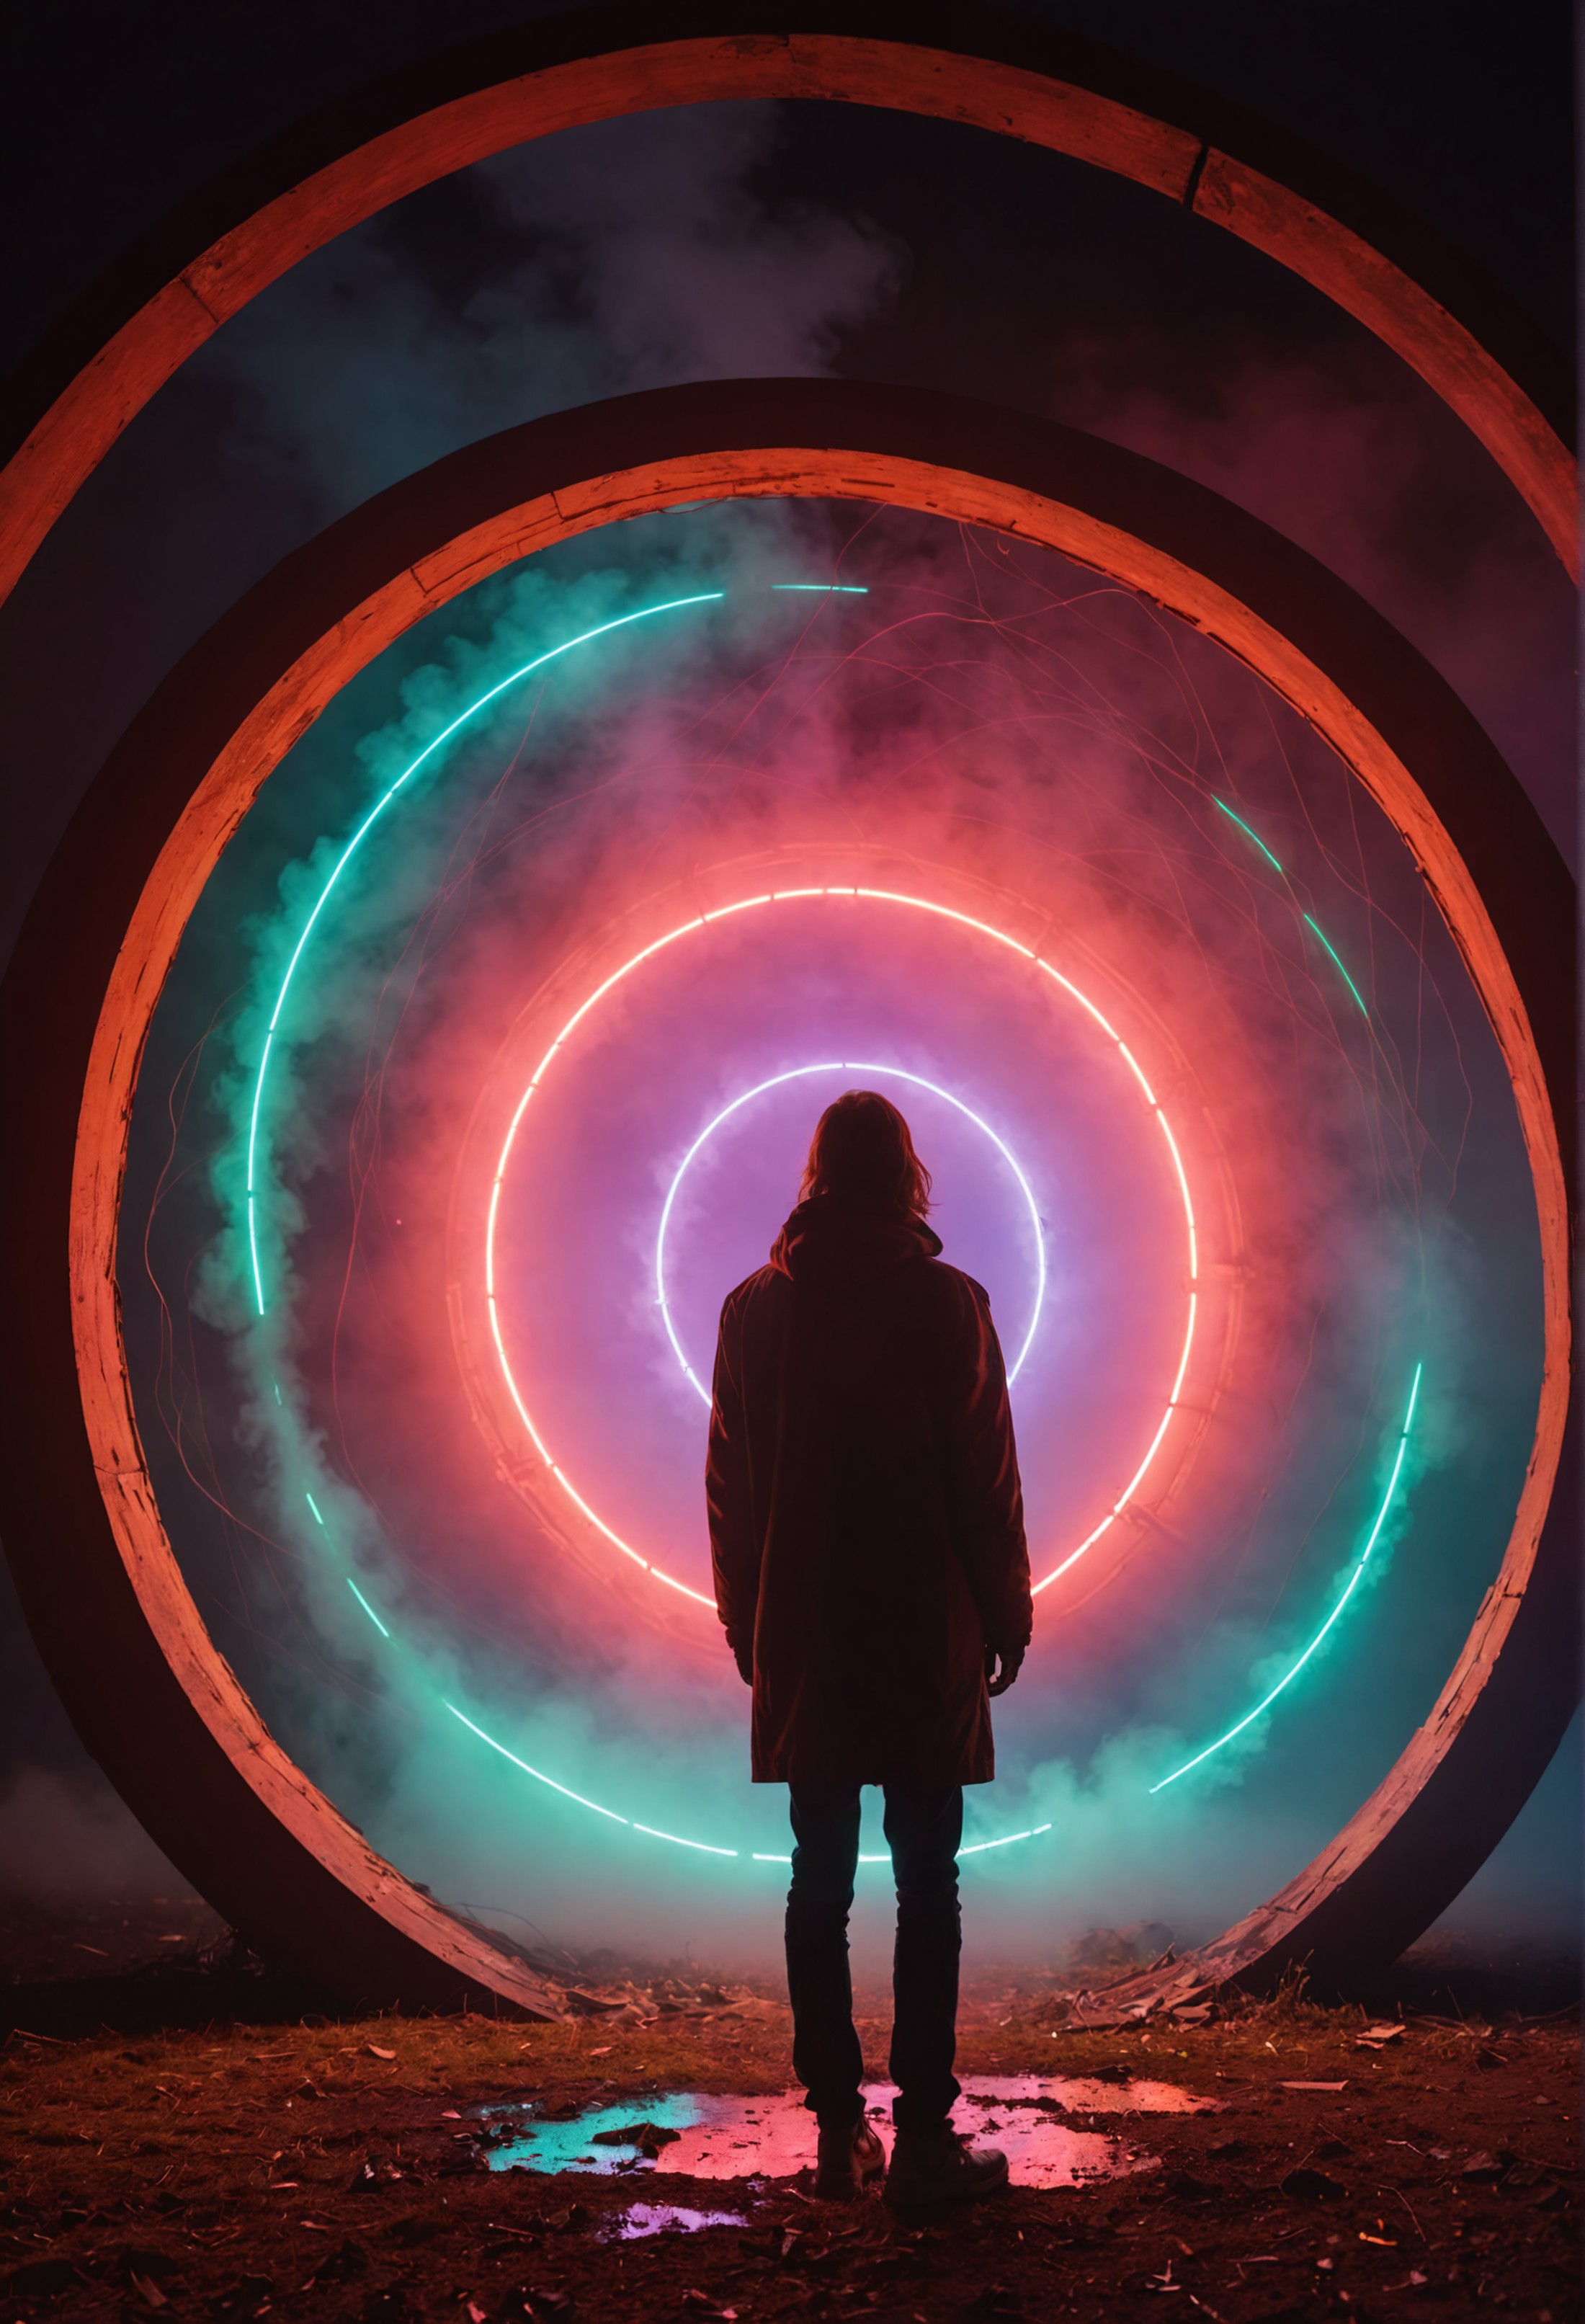 RAW Photo, an alien artifact, dense geometric structure, mysterious glowing portal, surrounded by neon lit fog, a person i...